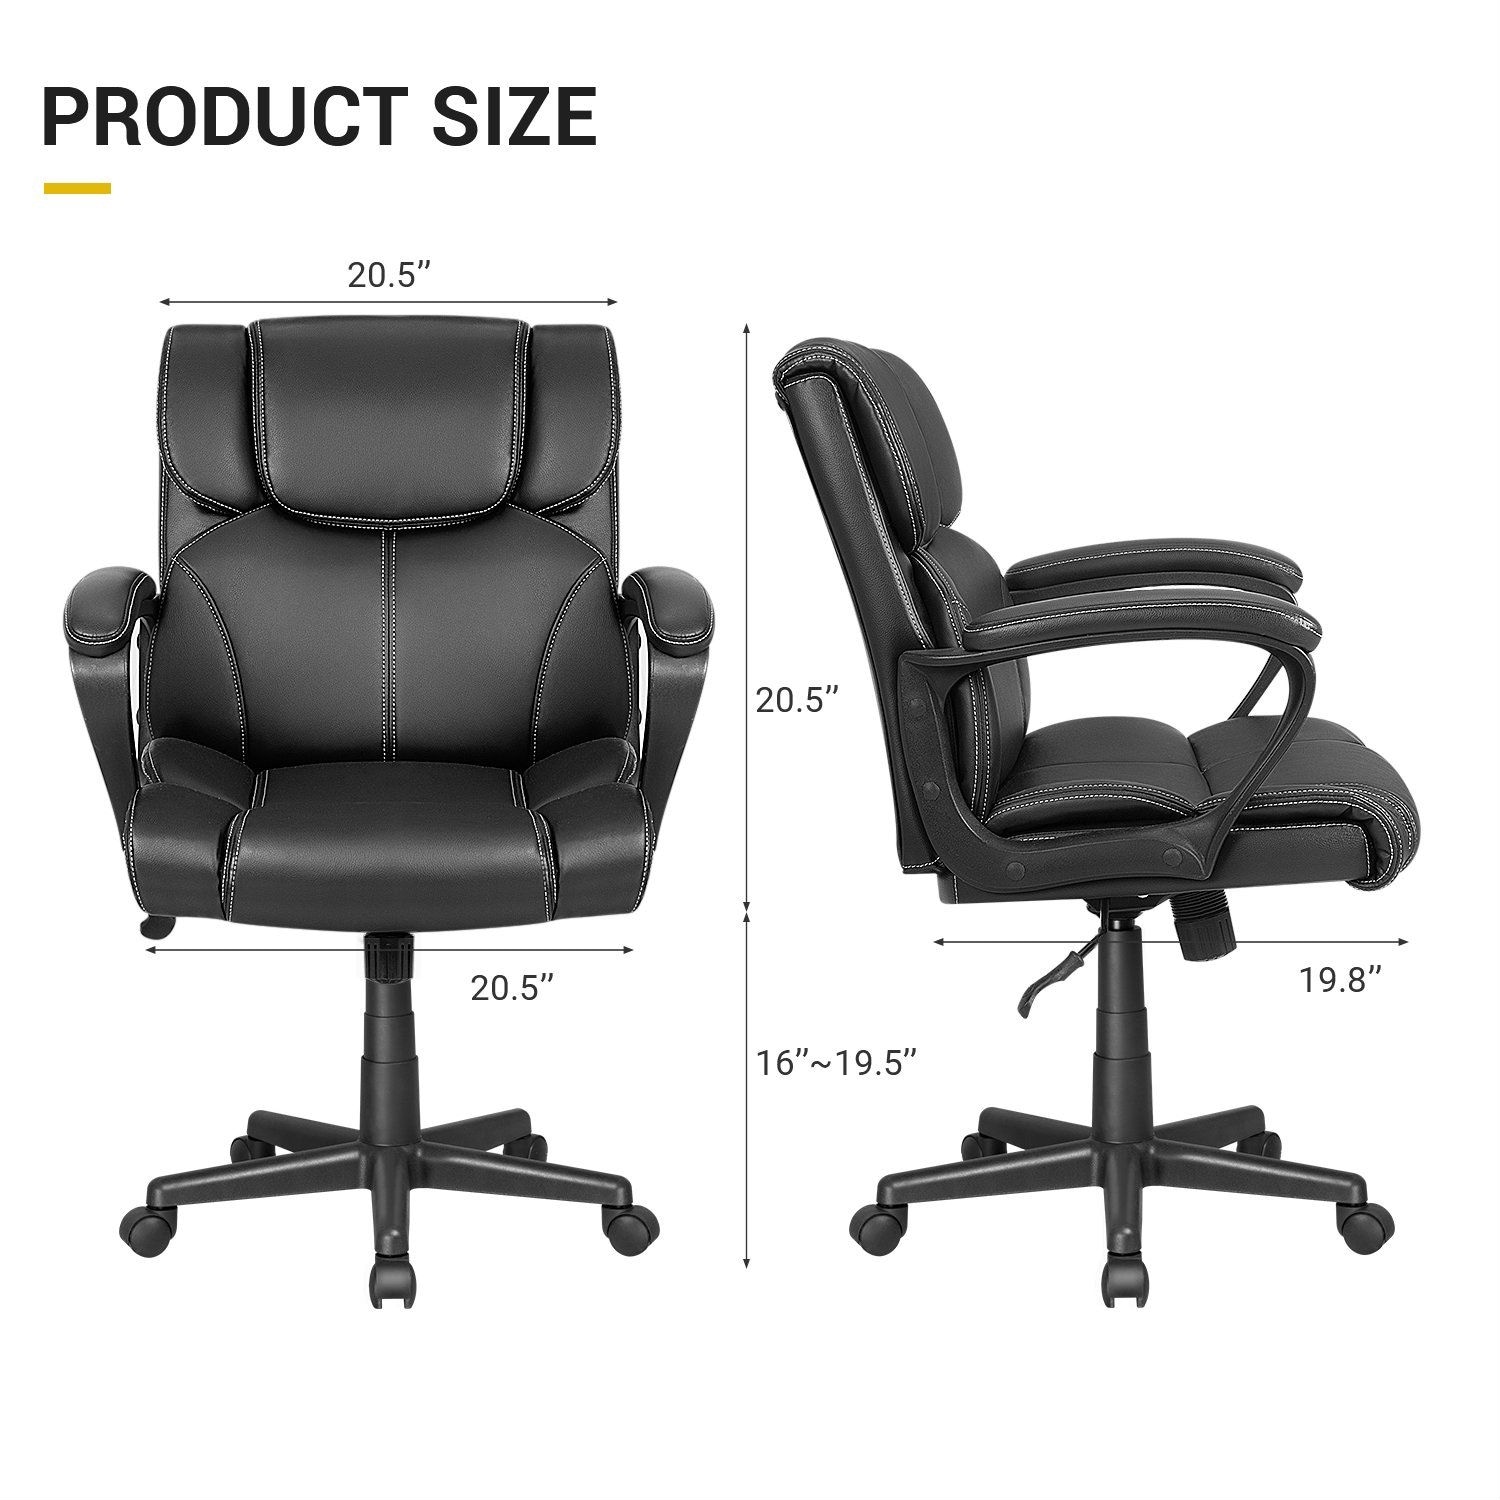 https://ak1.ostkcdn.com/images/products/is/images/direct/a1c2e320258db4cf1346dcf6f7048c80c2f8815d/Homall-Mid-Back-Office-Chair-Swivel-Computer-Task-Chair-with-Armrest-Ergonomic-Leather-Padded-Executive-Desk-Chair.jpg